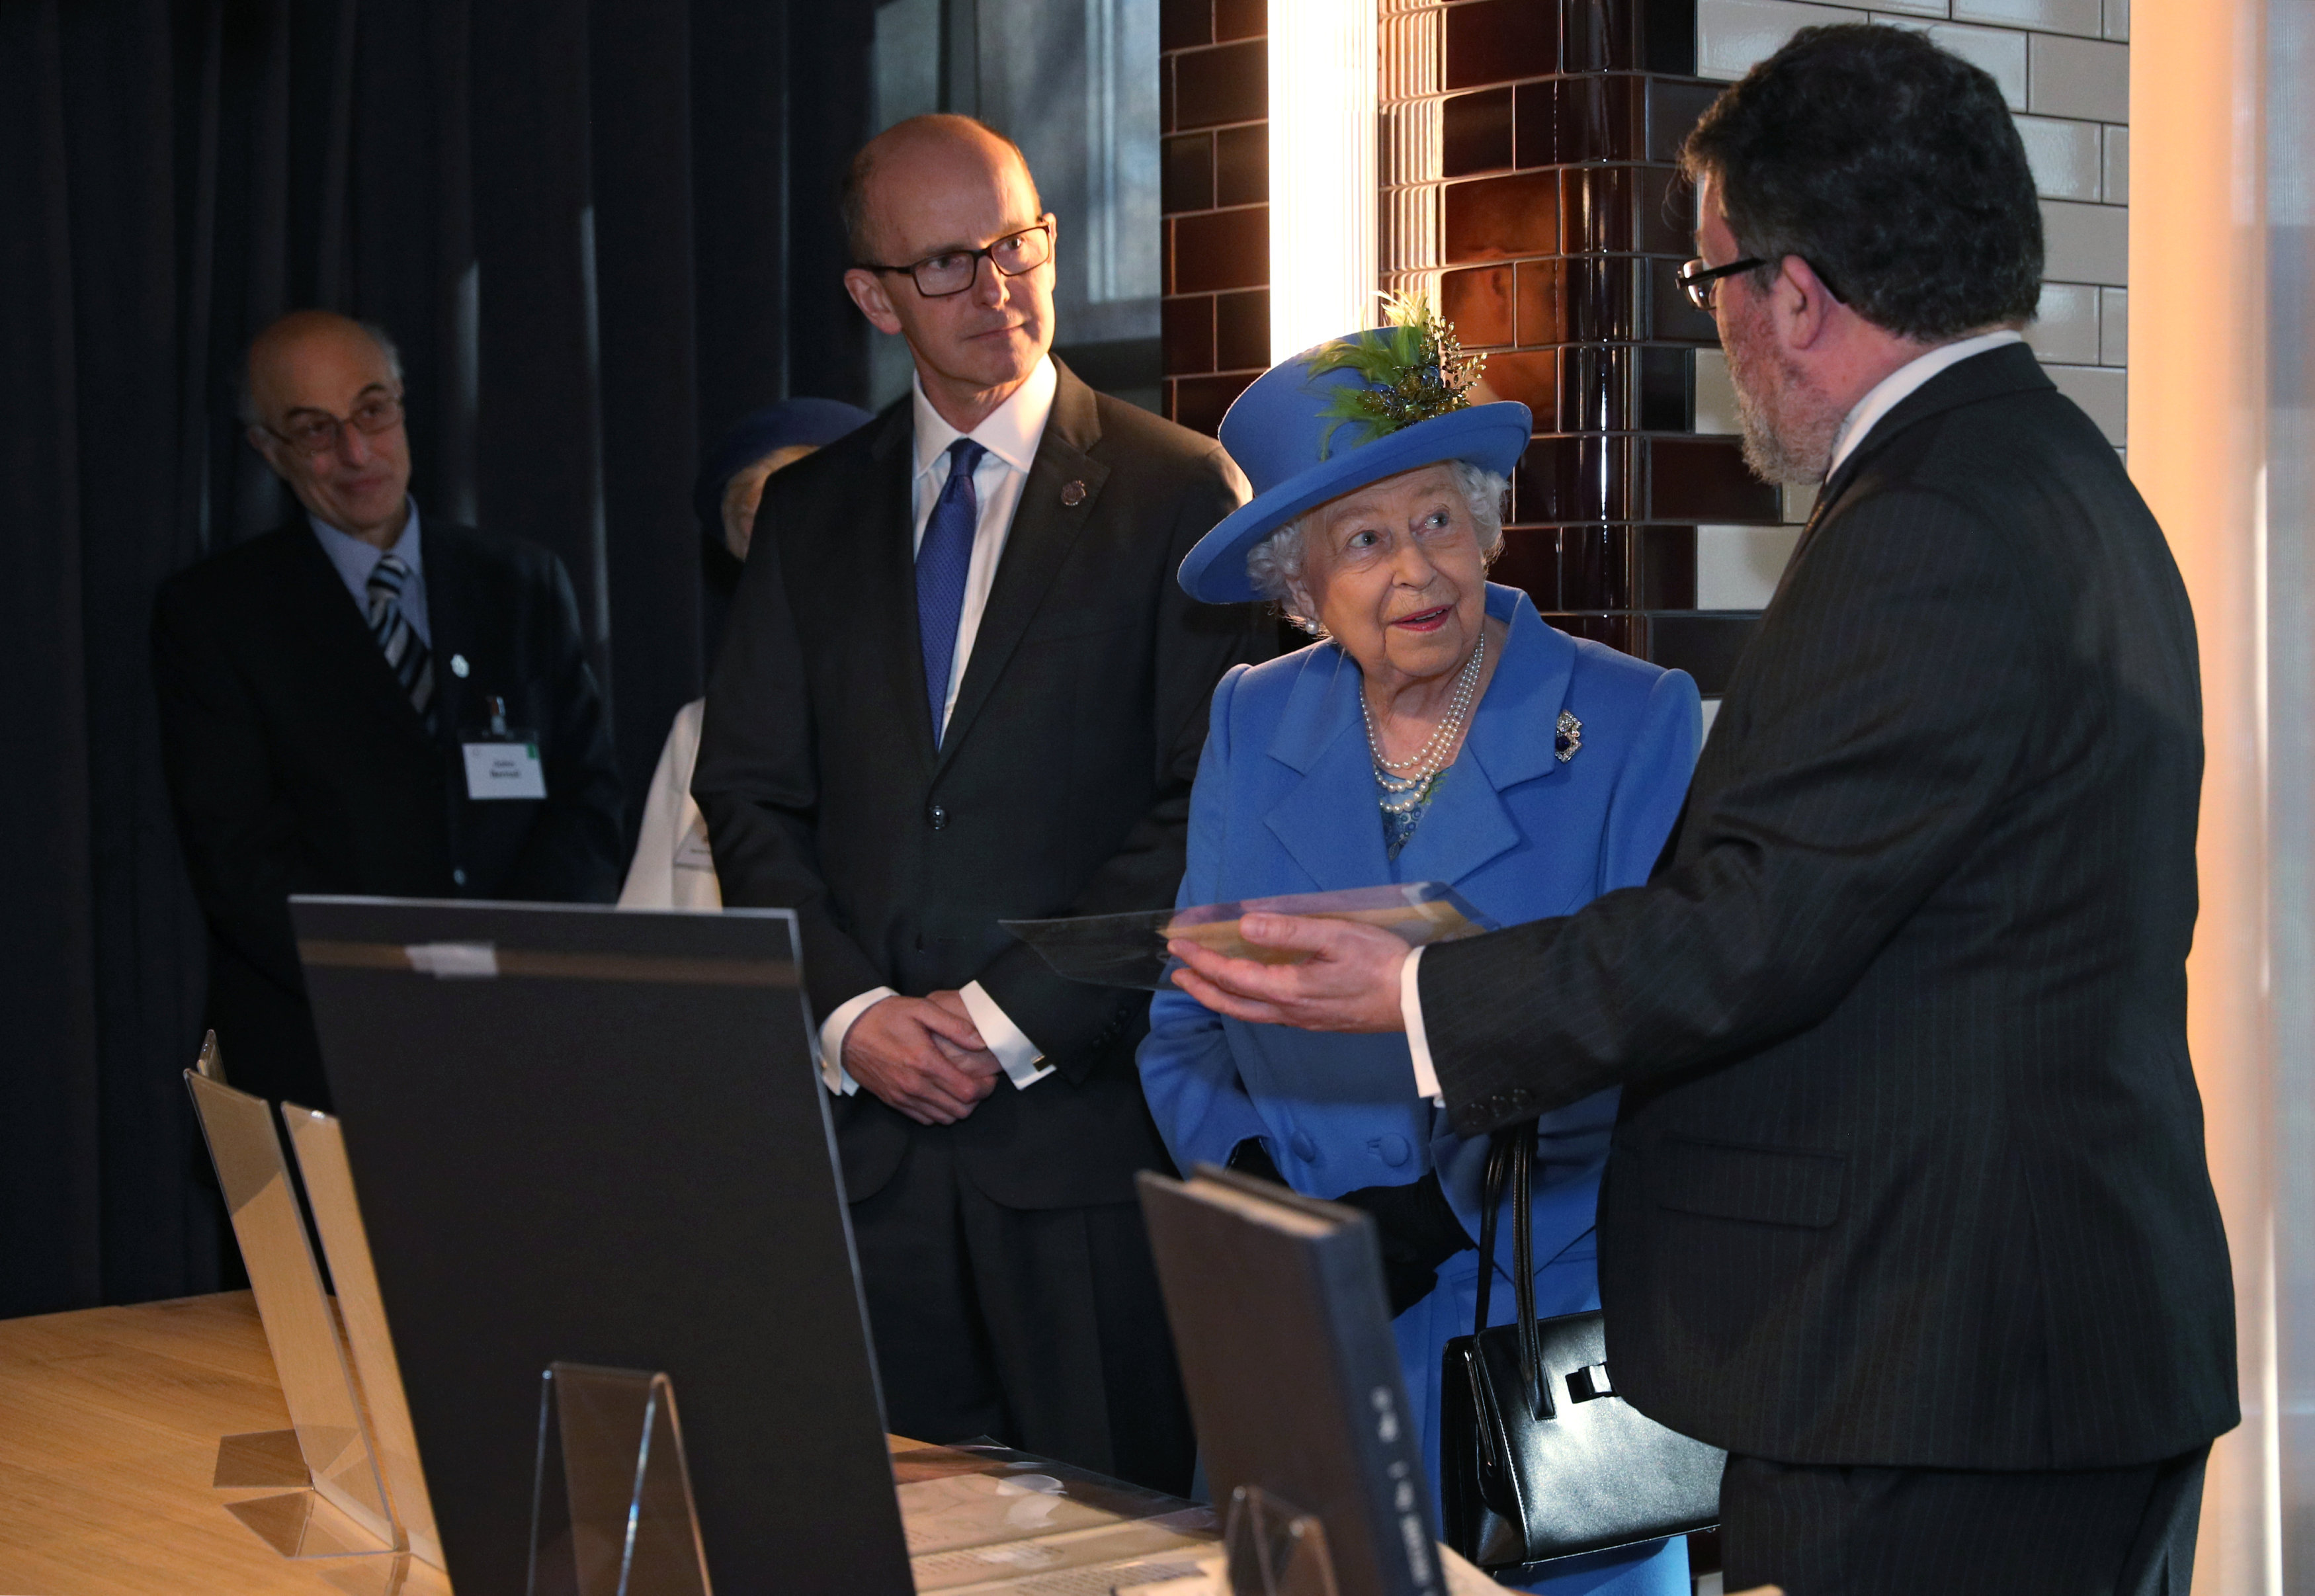 The Queen visits GCHQ 